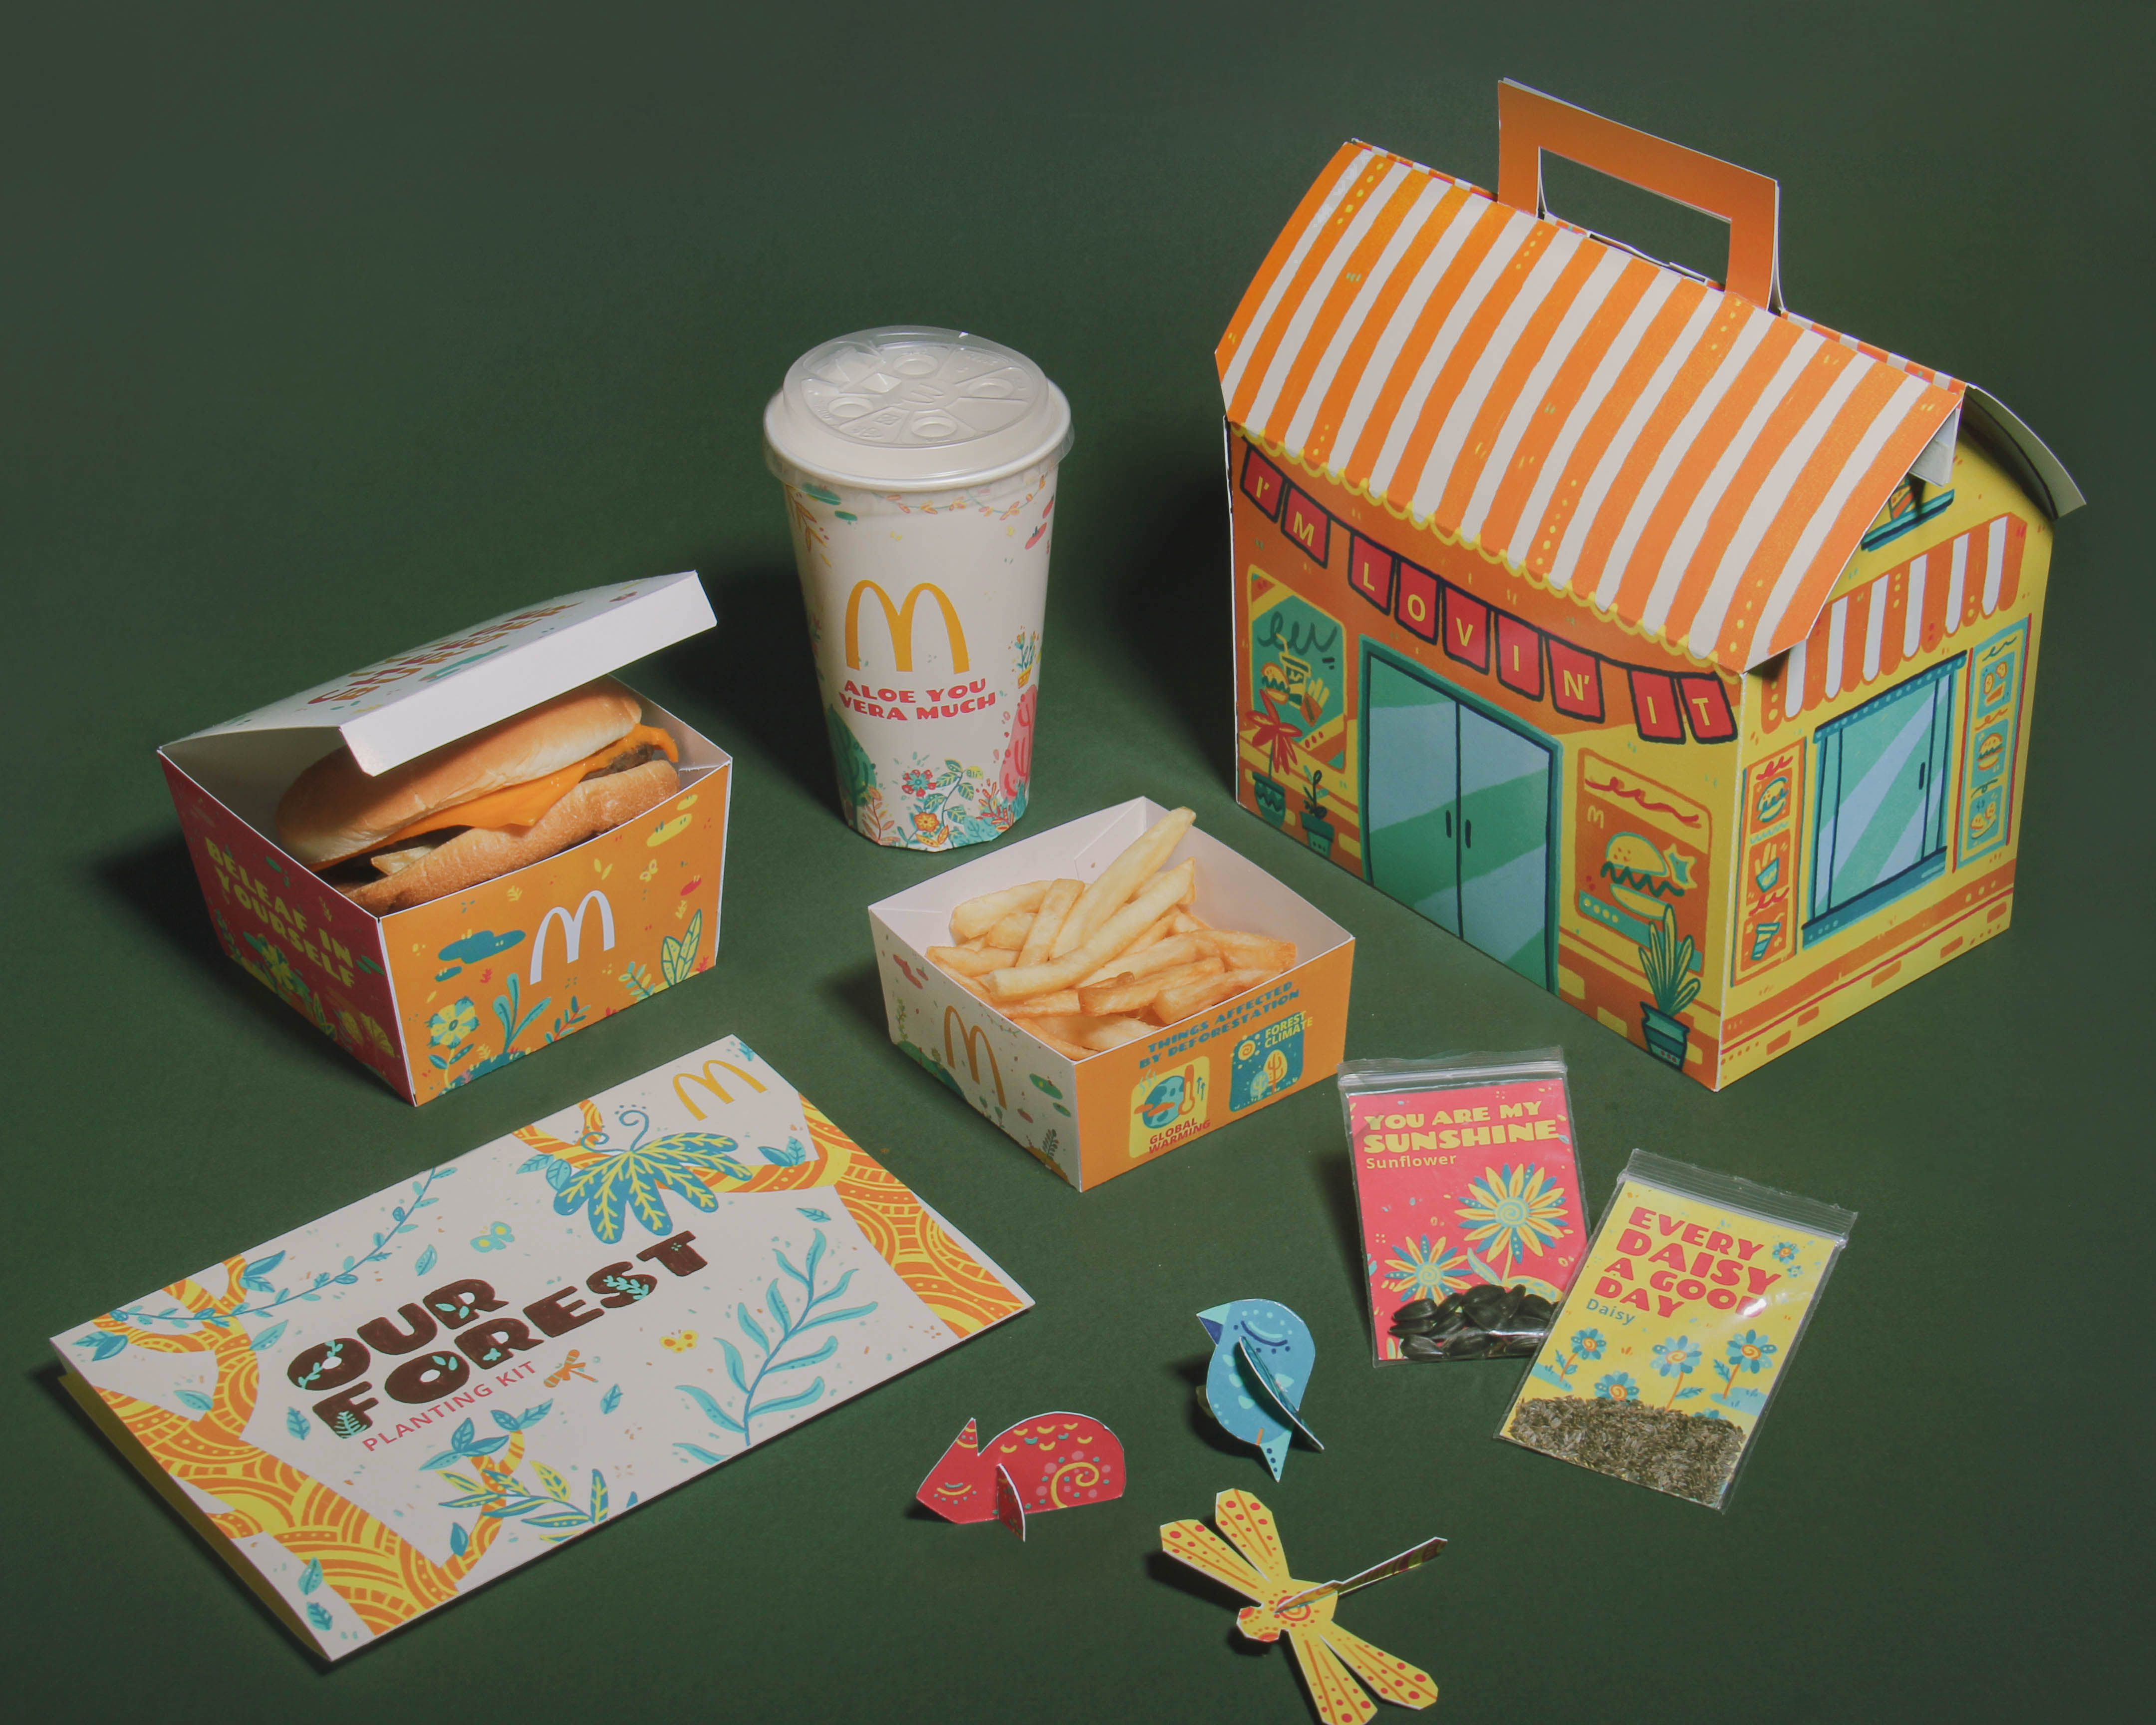 Our Forest Planting Kit: A McDonald’s Happy Meal Concept